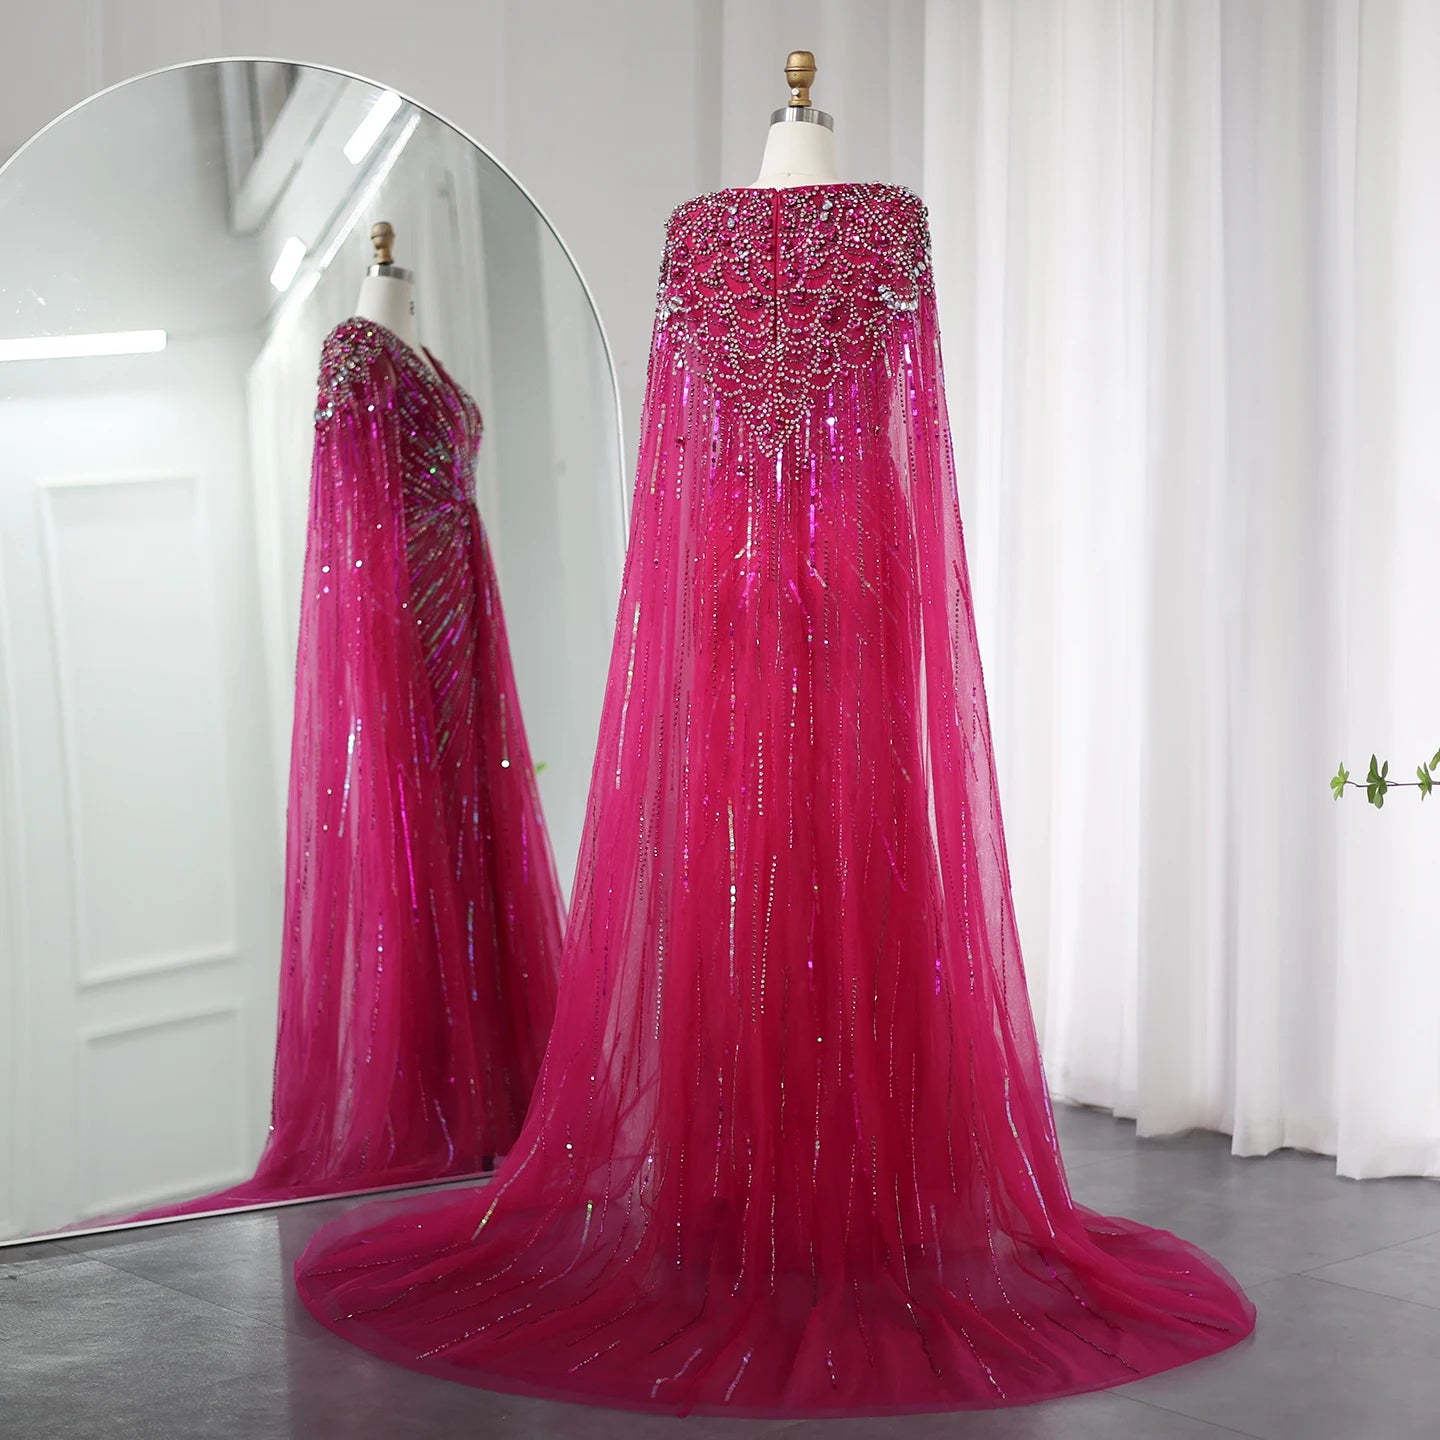 Luxury Dubai Evening Dresses with Cape. Fuchsia Crystal Gold Accents for an Elegant Women's Wedding Formal Party